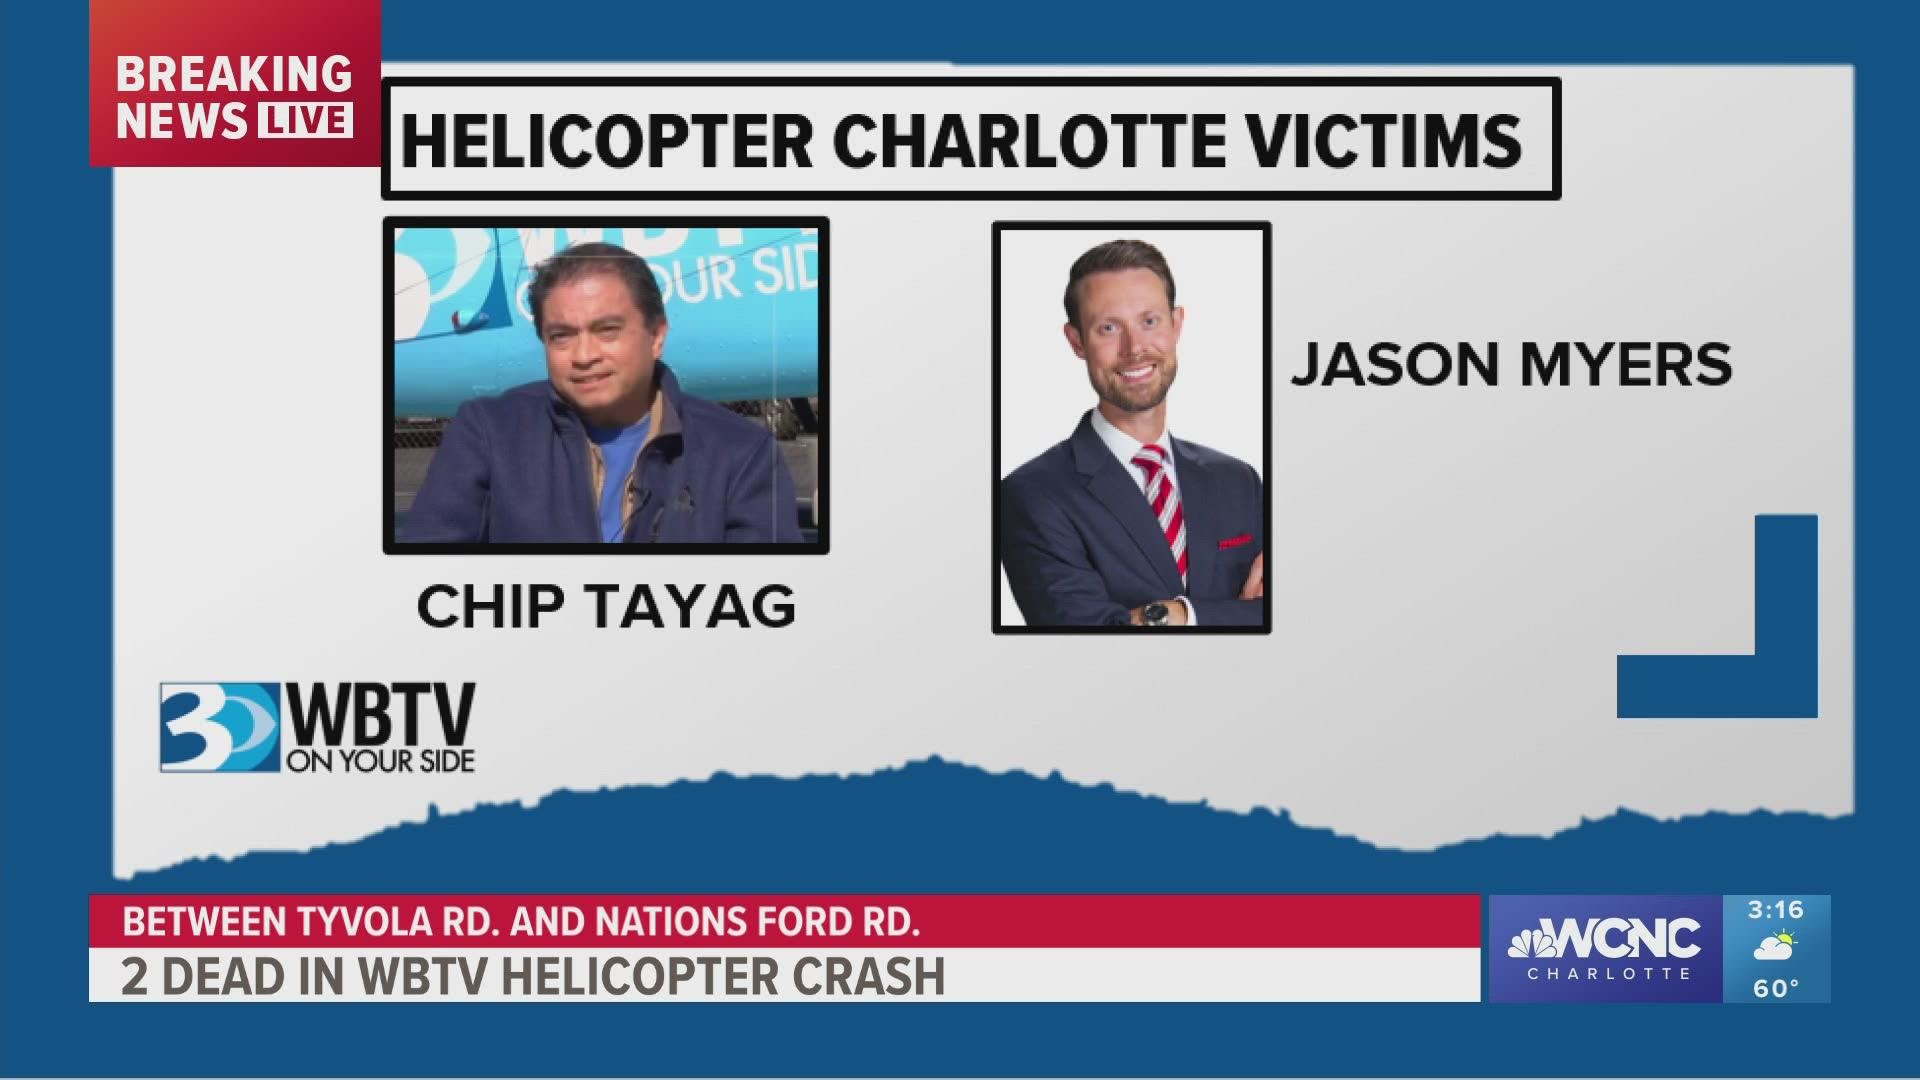 WBTV announced that meteorologist Jason Myers and chopper pilot Chip Tayag were killed in a helicopter crash near I-77 Tuesday.